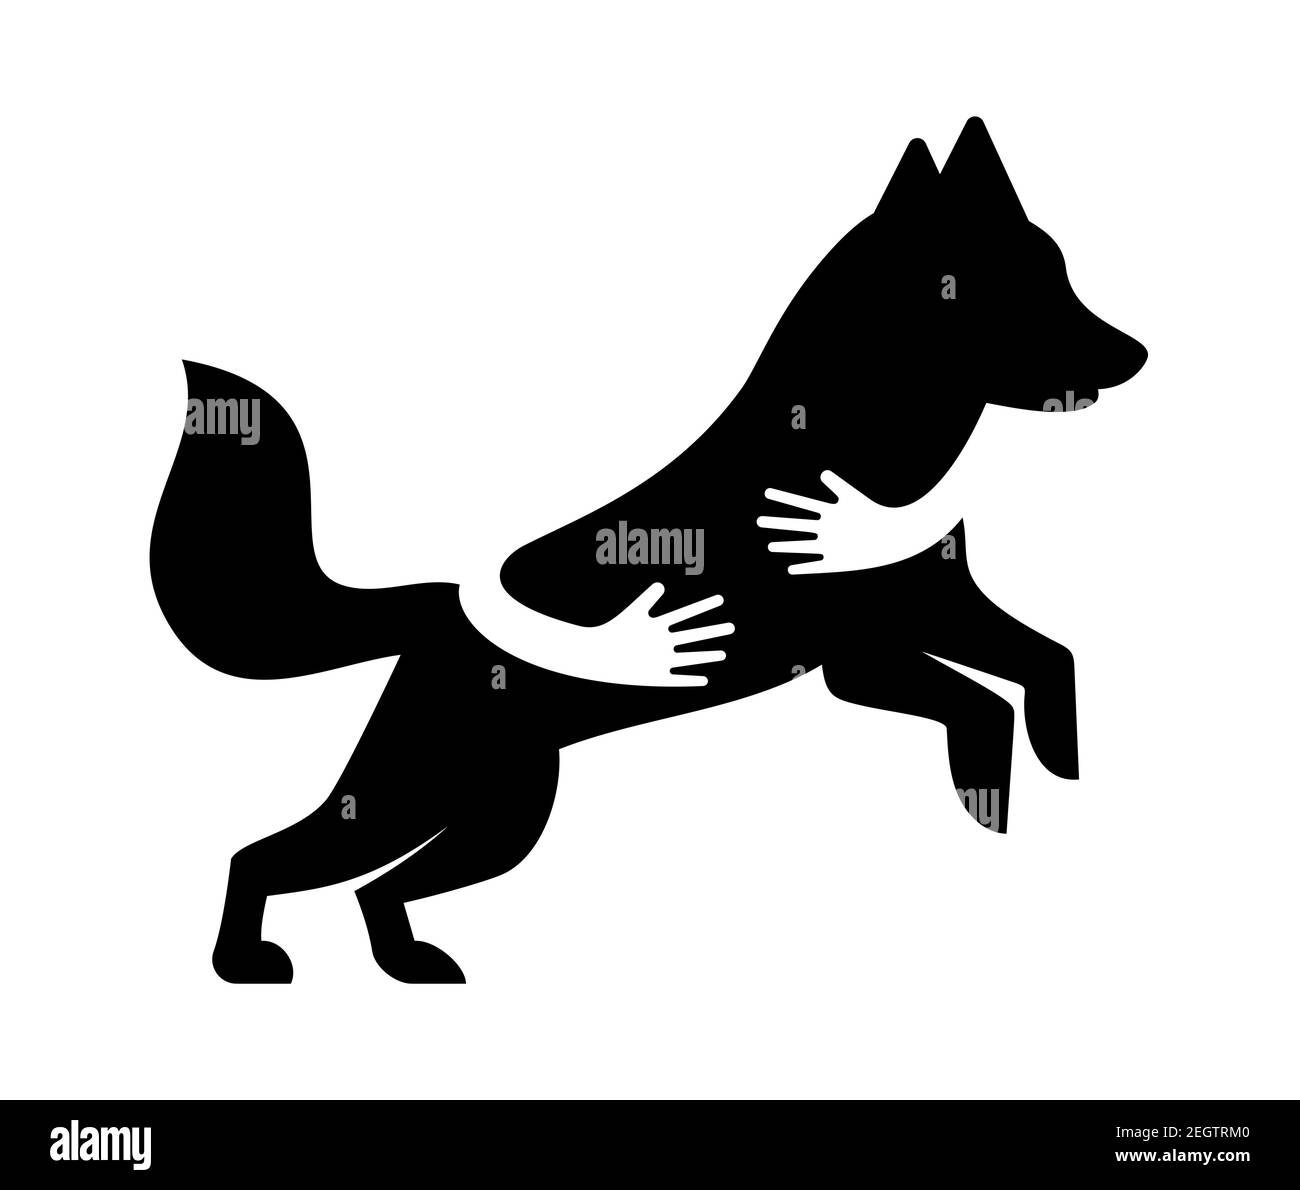 Human hands embracing or holding dog silhouette vector flat illustration. Creative emblem with arms in black color. Pet shop, veterinary clinic, pet sitter service sign design template. Stock Vector